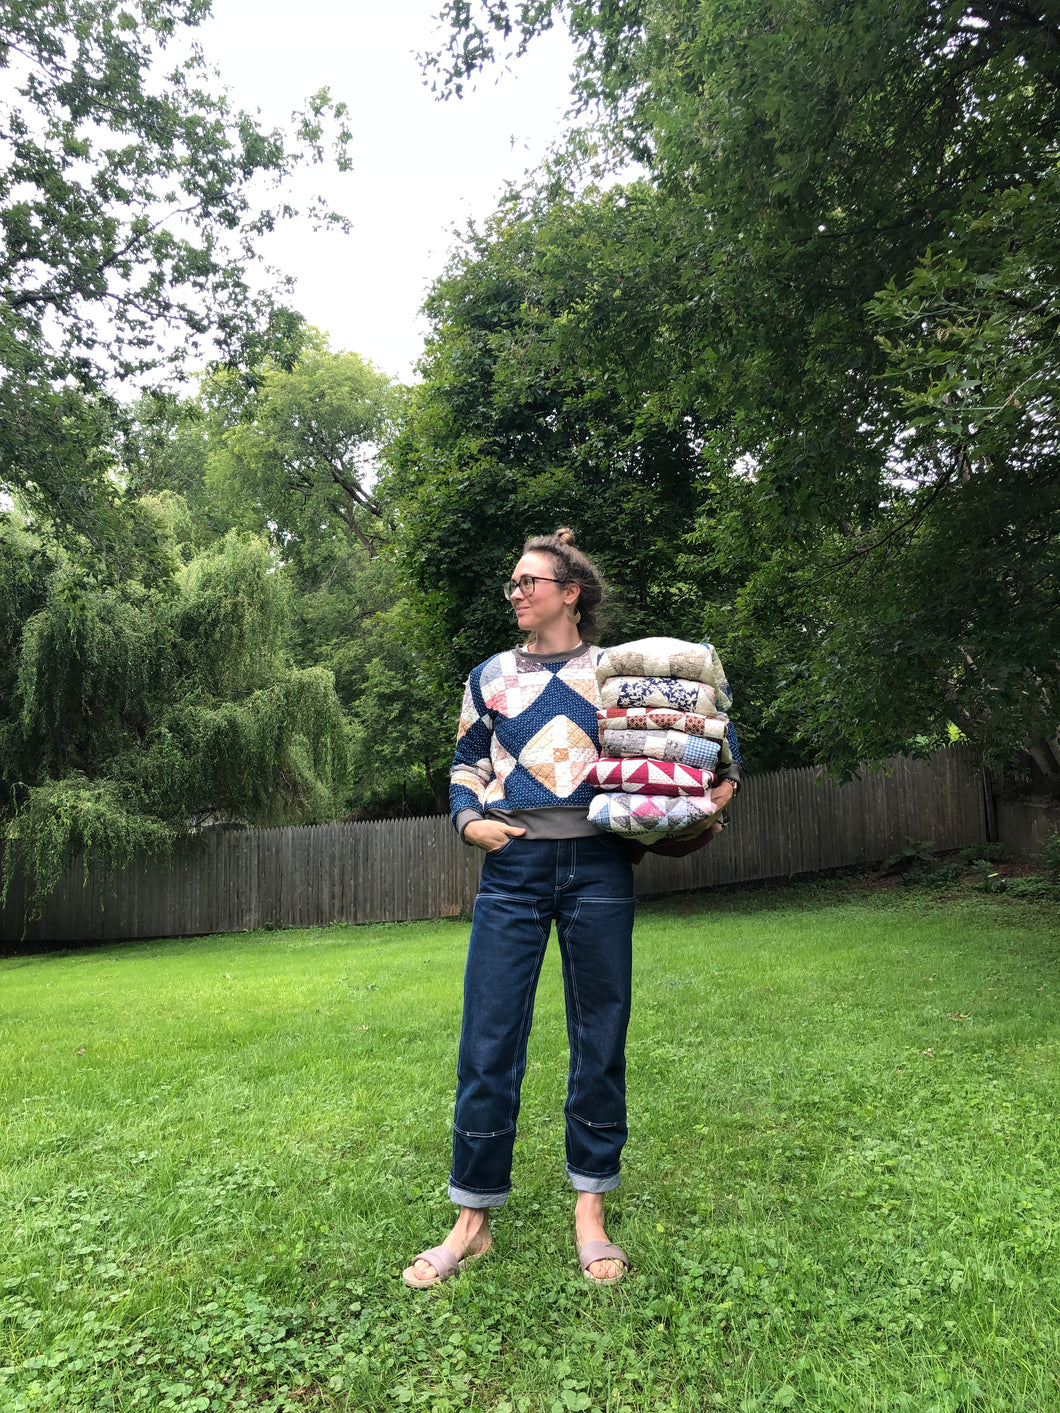 Supply Your Own Quilt: All Quilt Pullover